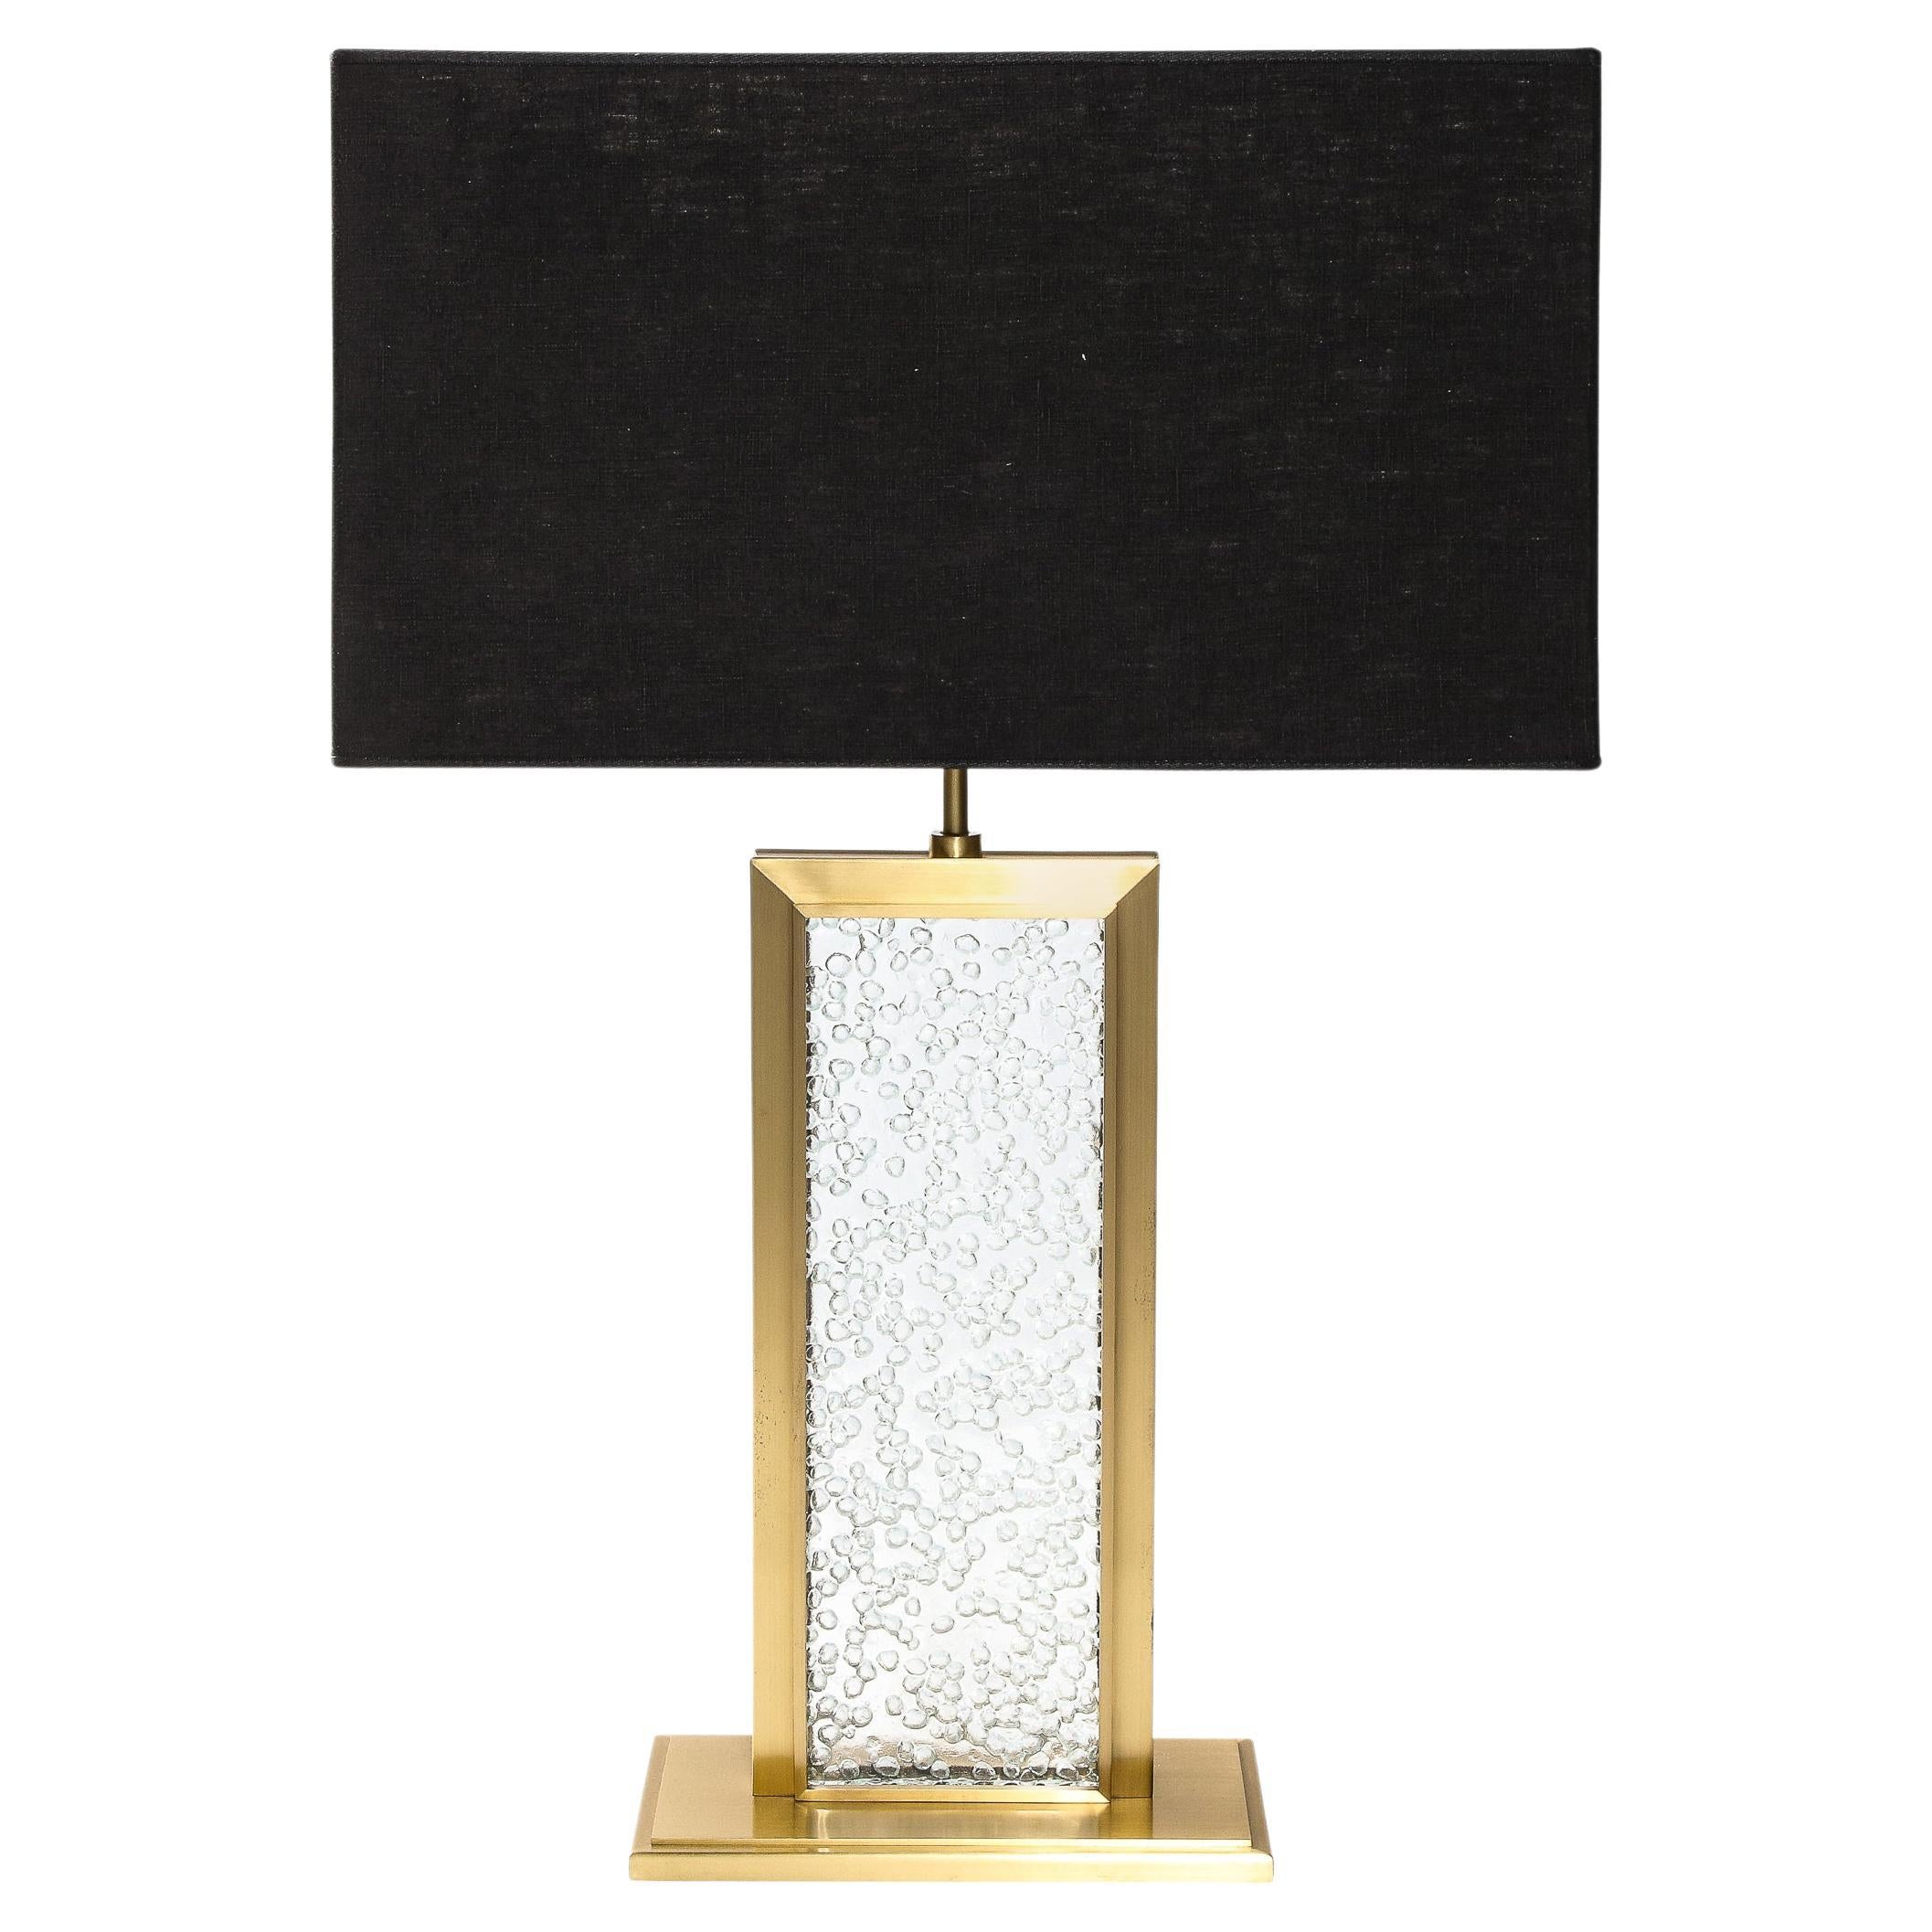 Modernist Textured Hand-Blown Murano Glass Table Lamp with Brass Fittings